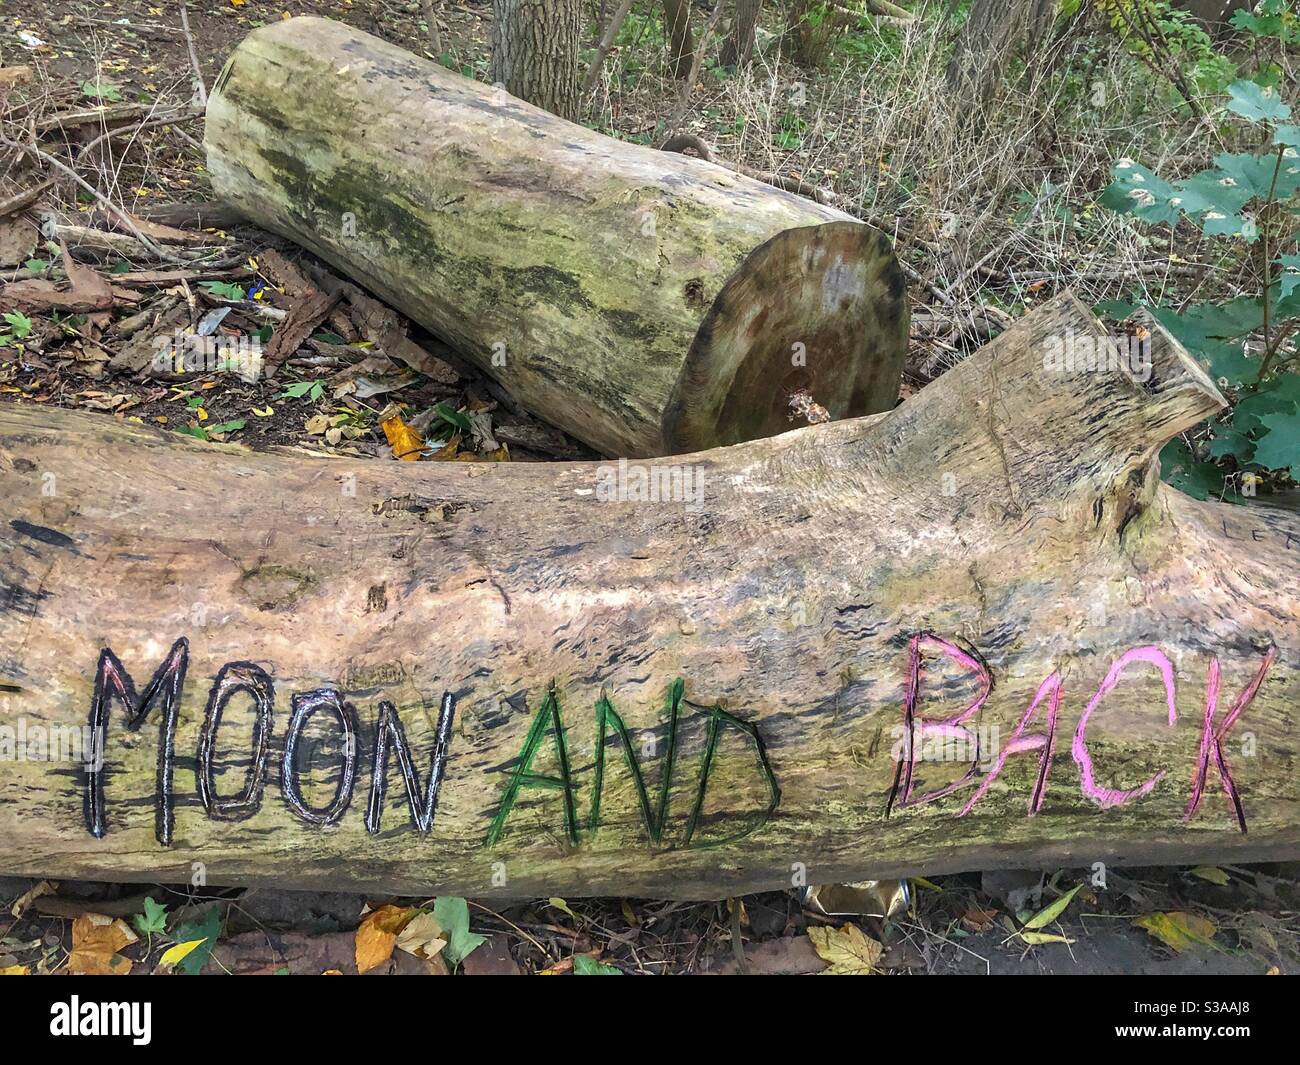 Words etched on a fallen tree trunk. Stock Photo